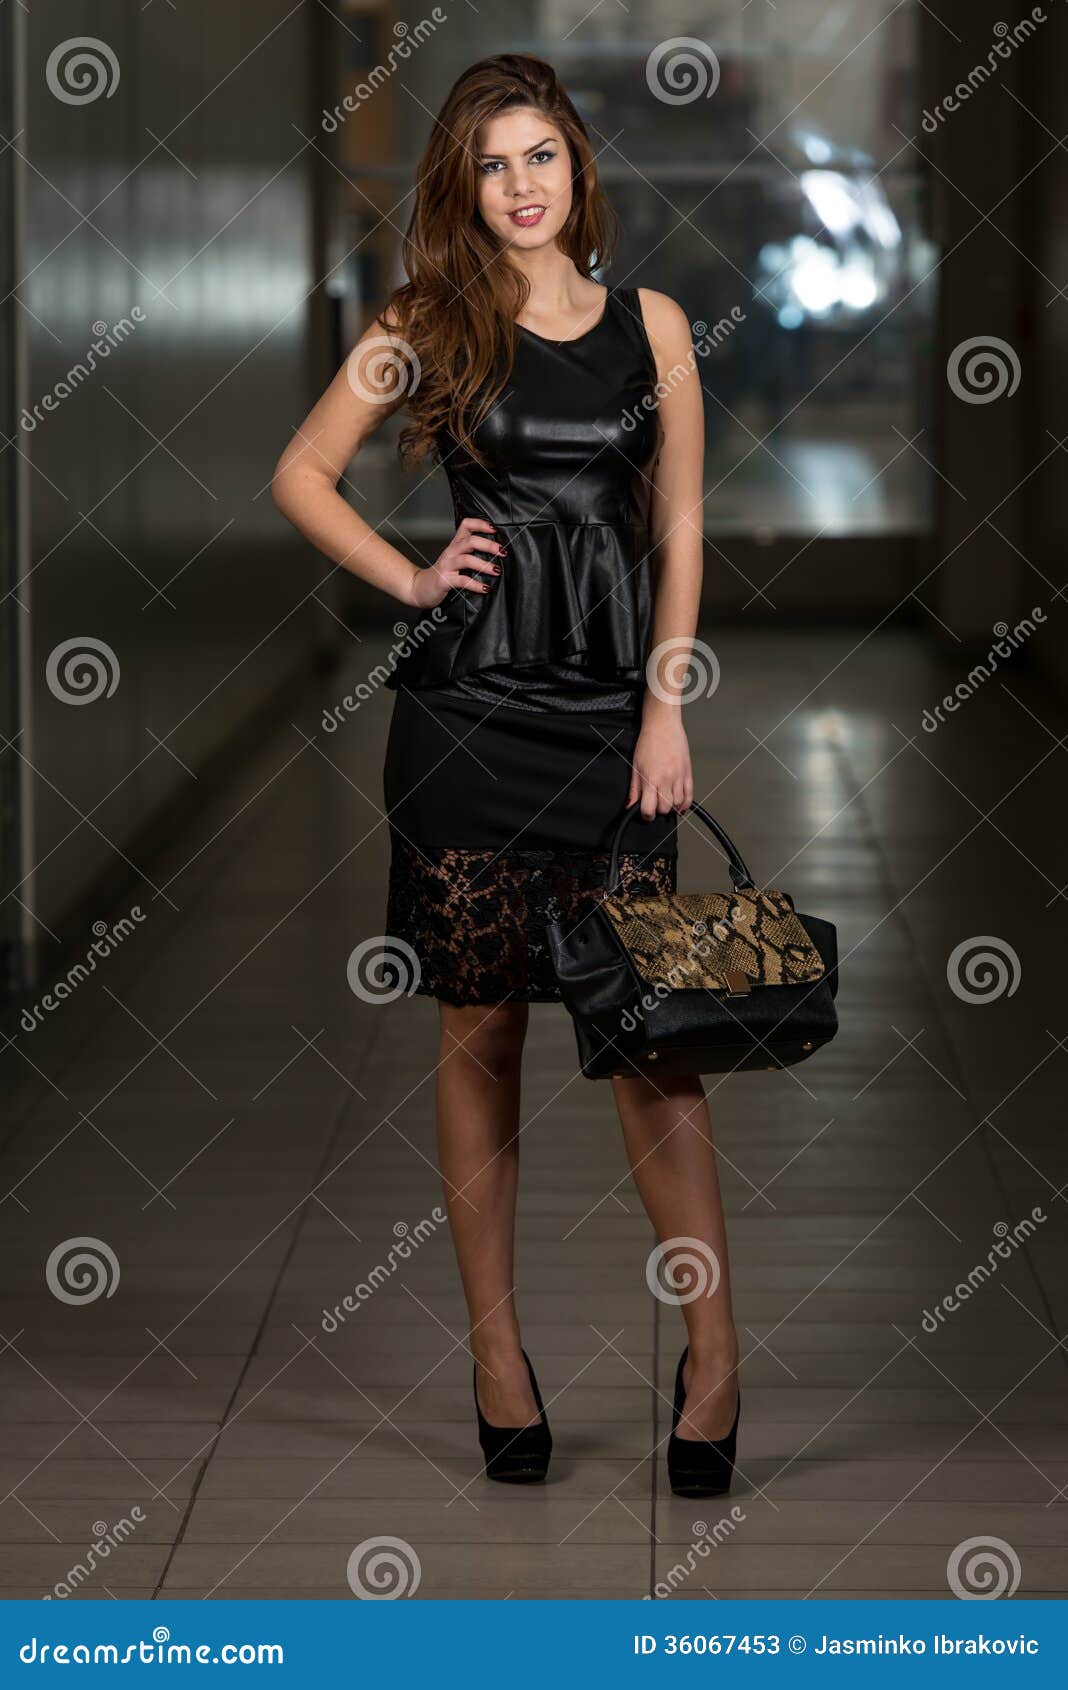 Woman In Black Skirt And Leather Peplum Top Stock Image 